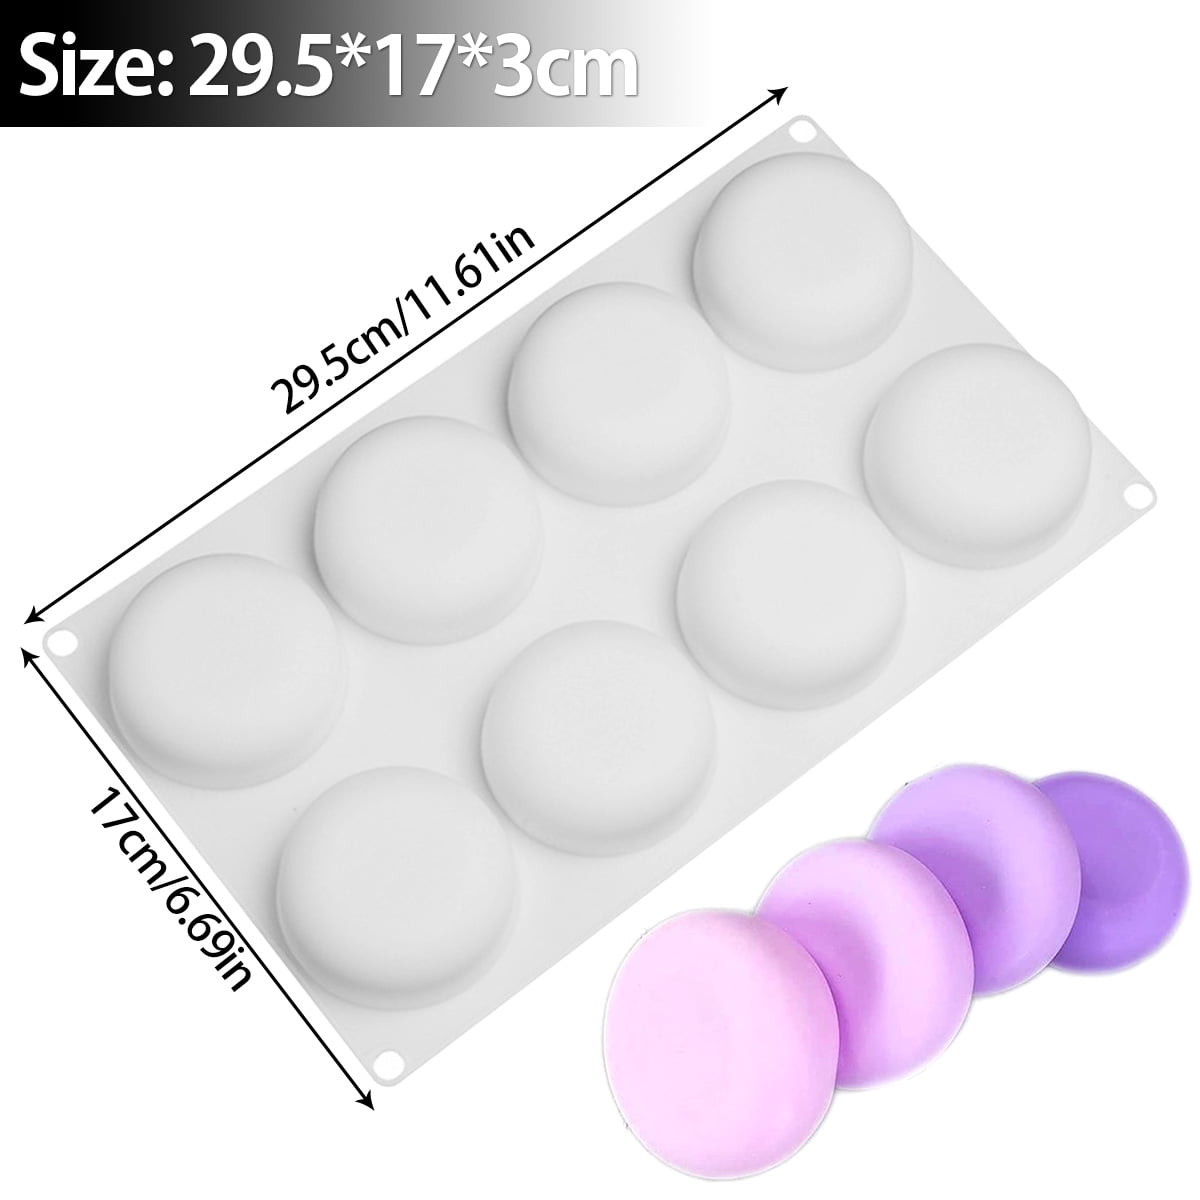 Domed Stone Cobblestone Egg Silicone Soap Mold 8 Cavities Oval Soap Mold  Silicone Molds Plaster Mold Silicone Mold Chocolate Mold 